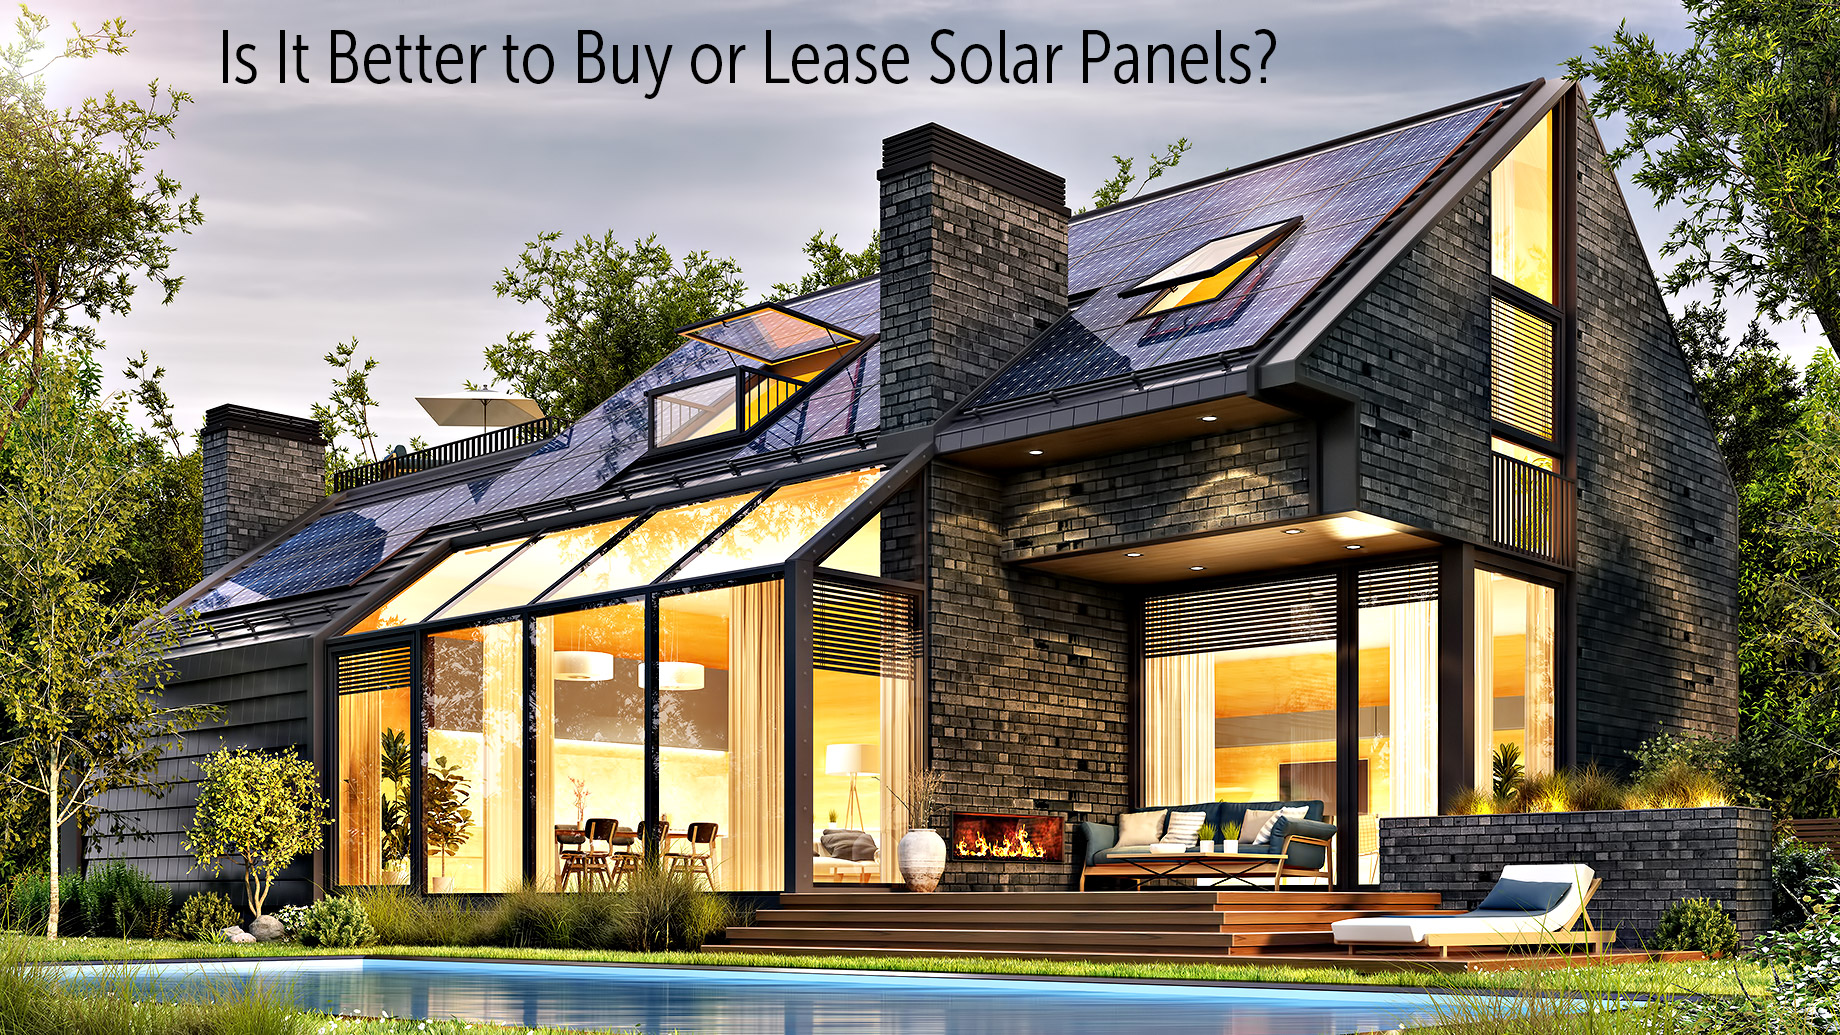 Is It Better to Buy or Lease Solar Panels?